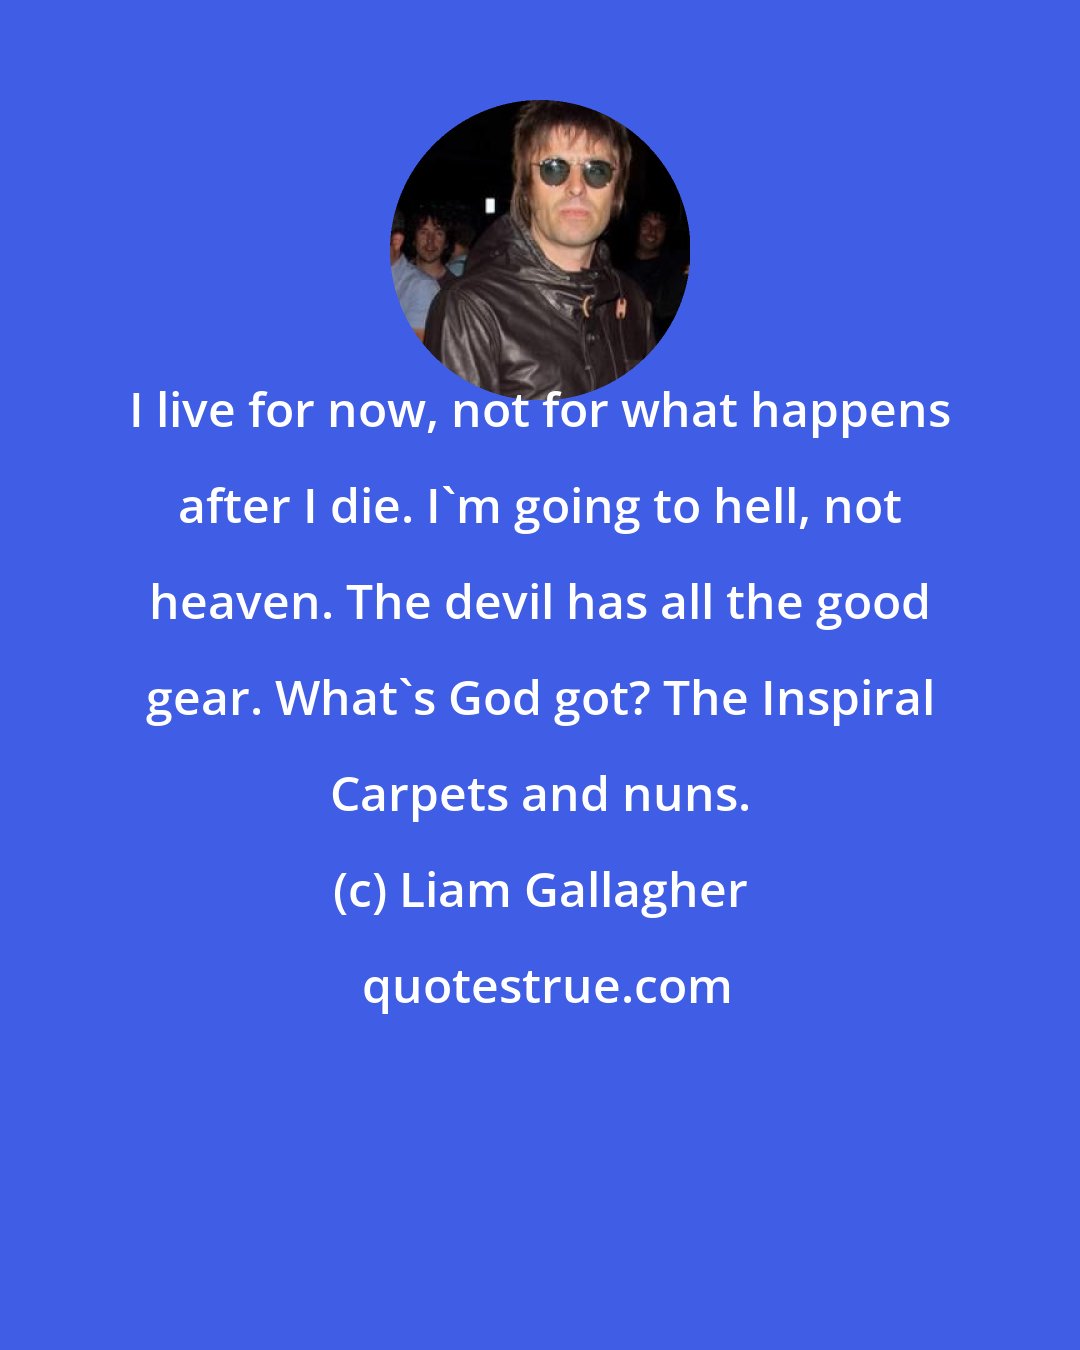 Liam Gallagher: I live for now, not for what happens after I die. I'm going to hell, not heaven. The devil has all the good gear. What's God got? The Inspiral Carpets and nuns.